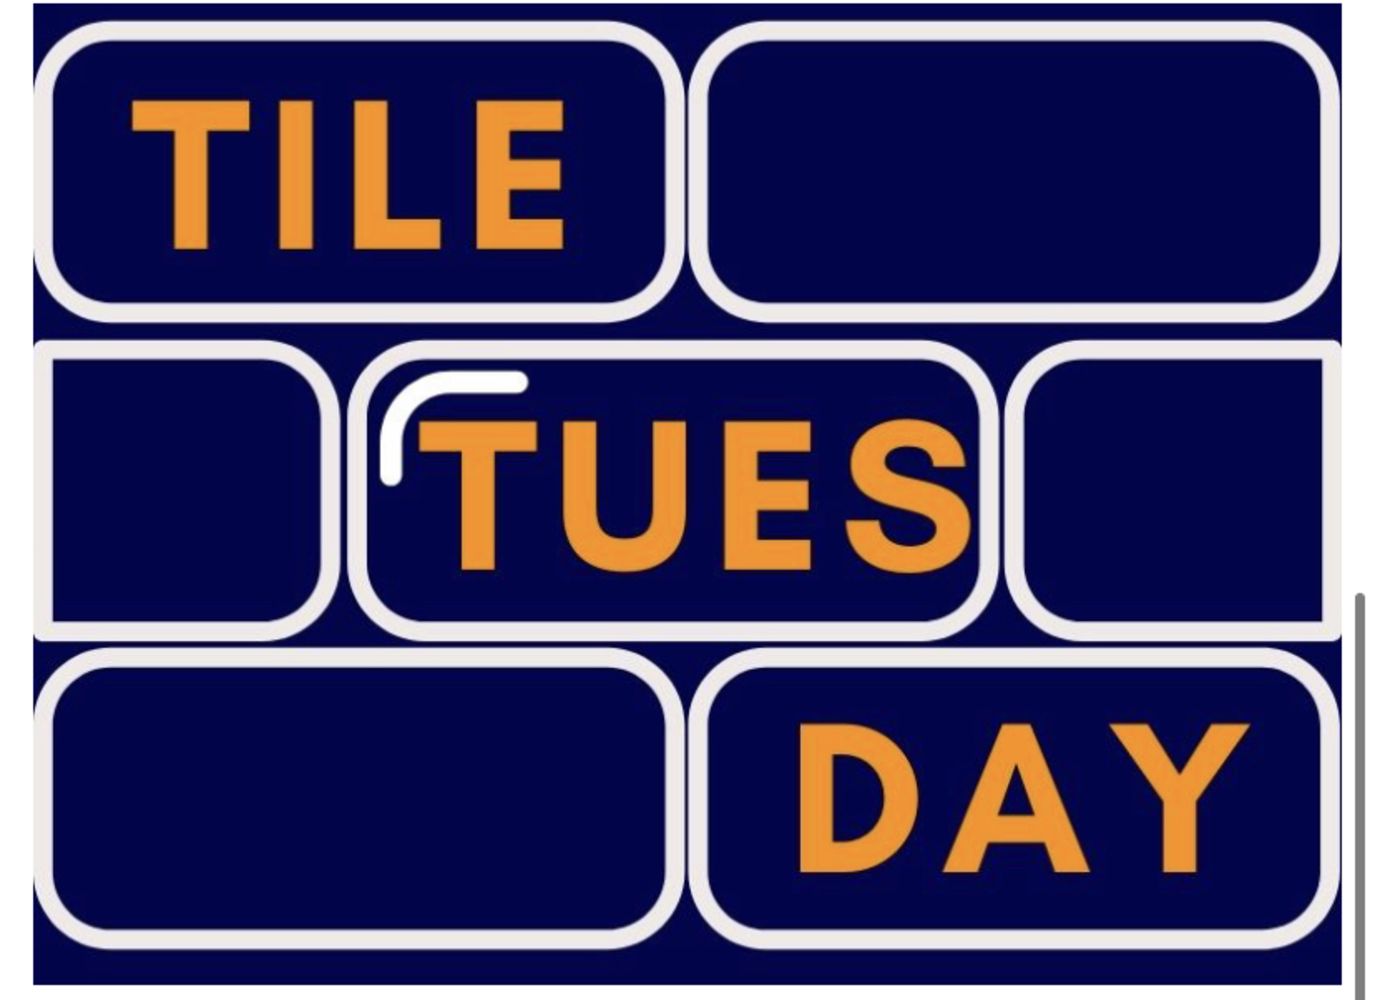 No Reserve - Tile Tuesday - “over £80k worth of tiles – Sourced from Johnsons Tiles” - 13th April